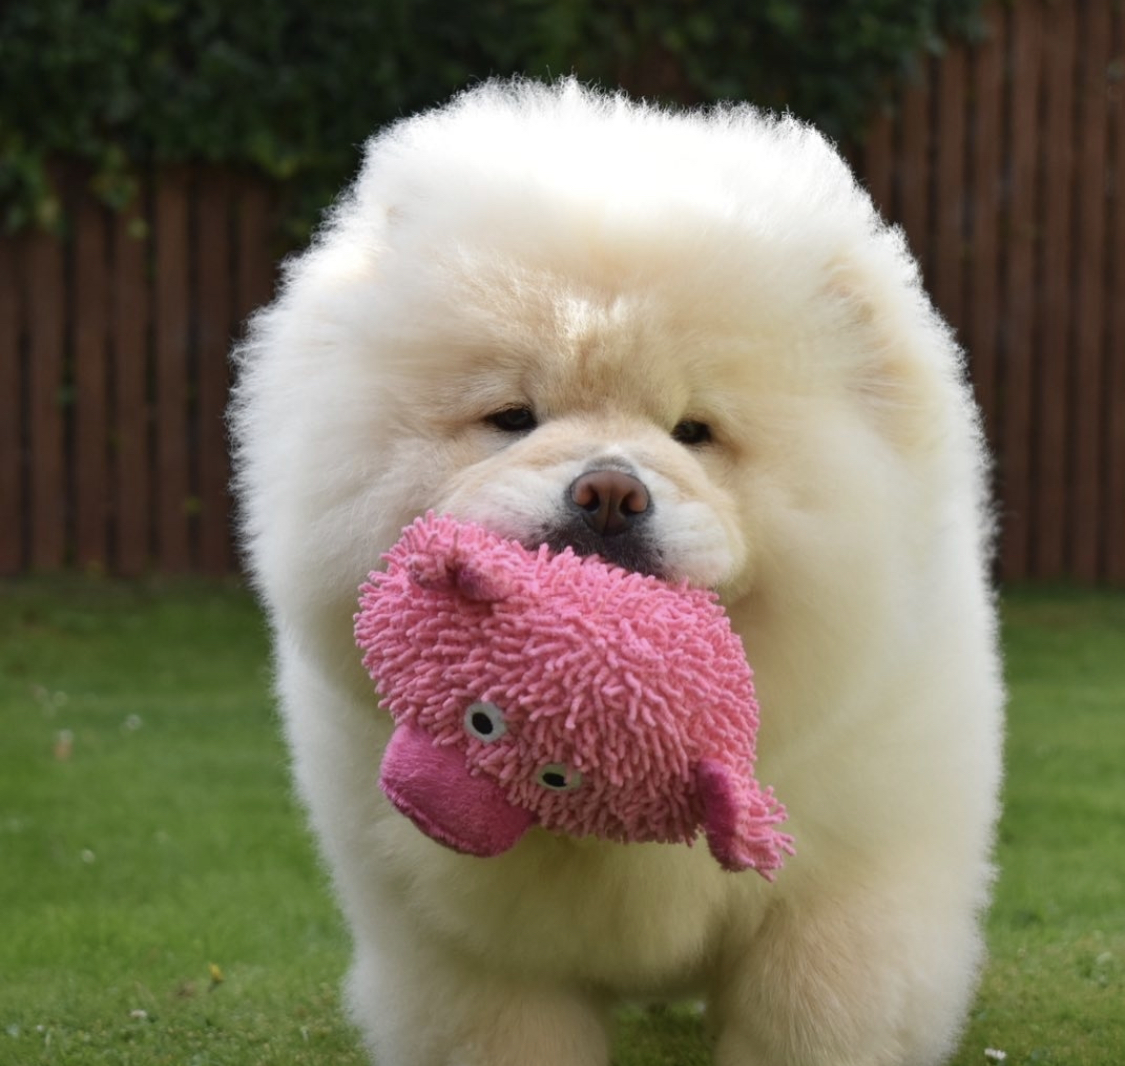 A white Chow Chow standing in the yard with its stuffed toy